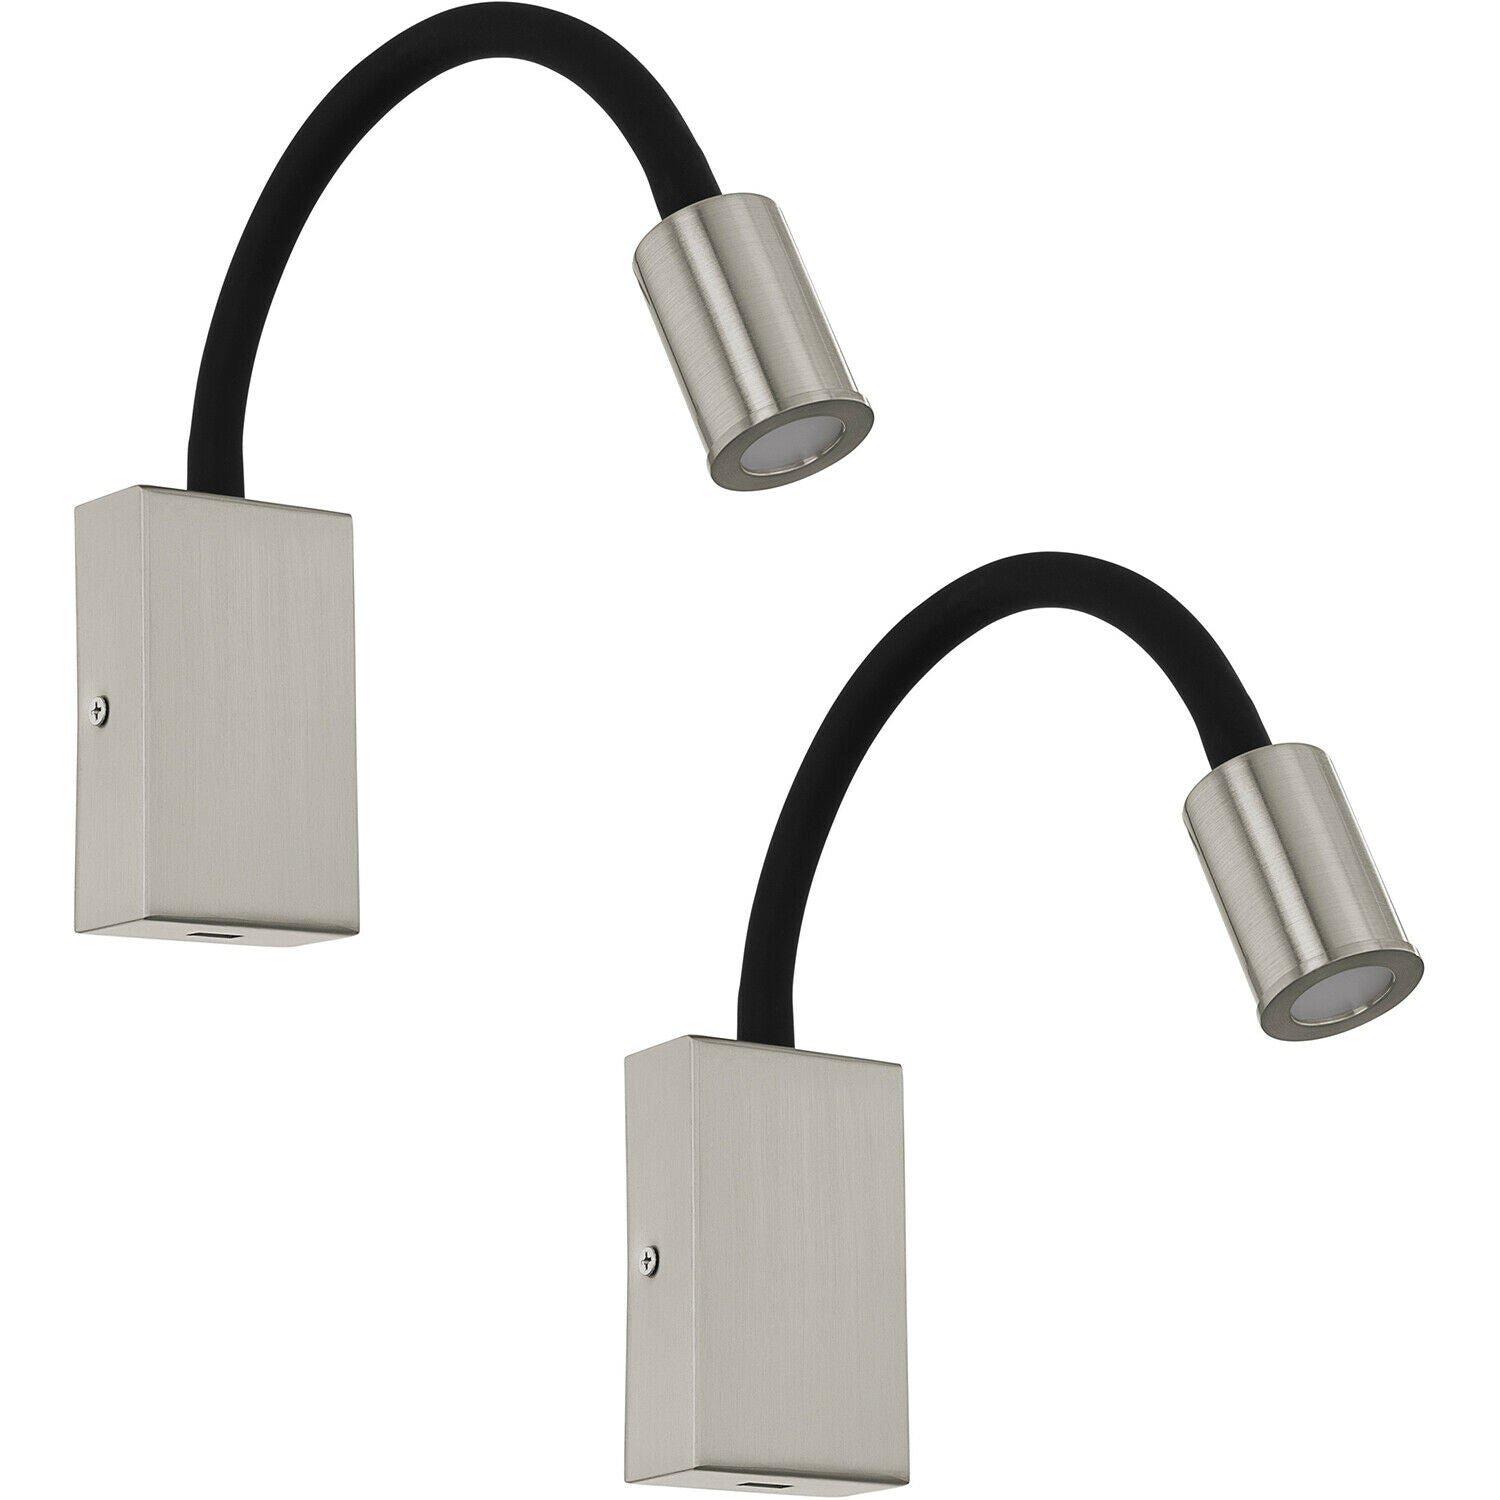 2 PACK Wall Light Colour Satin Nickel Black Steel & Plasic LED 3.5W Included